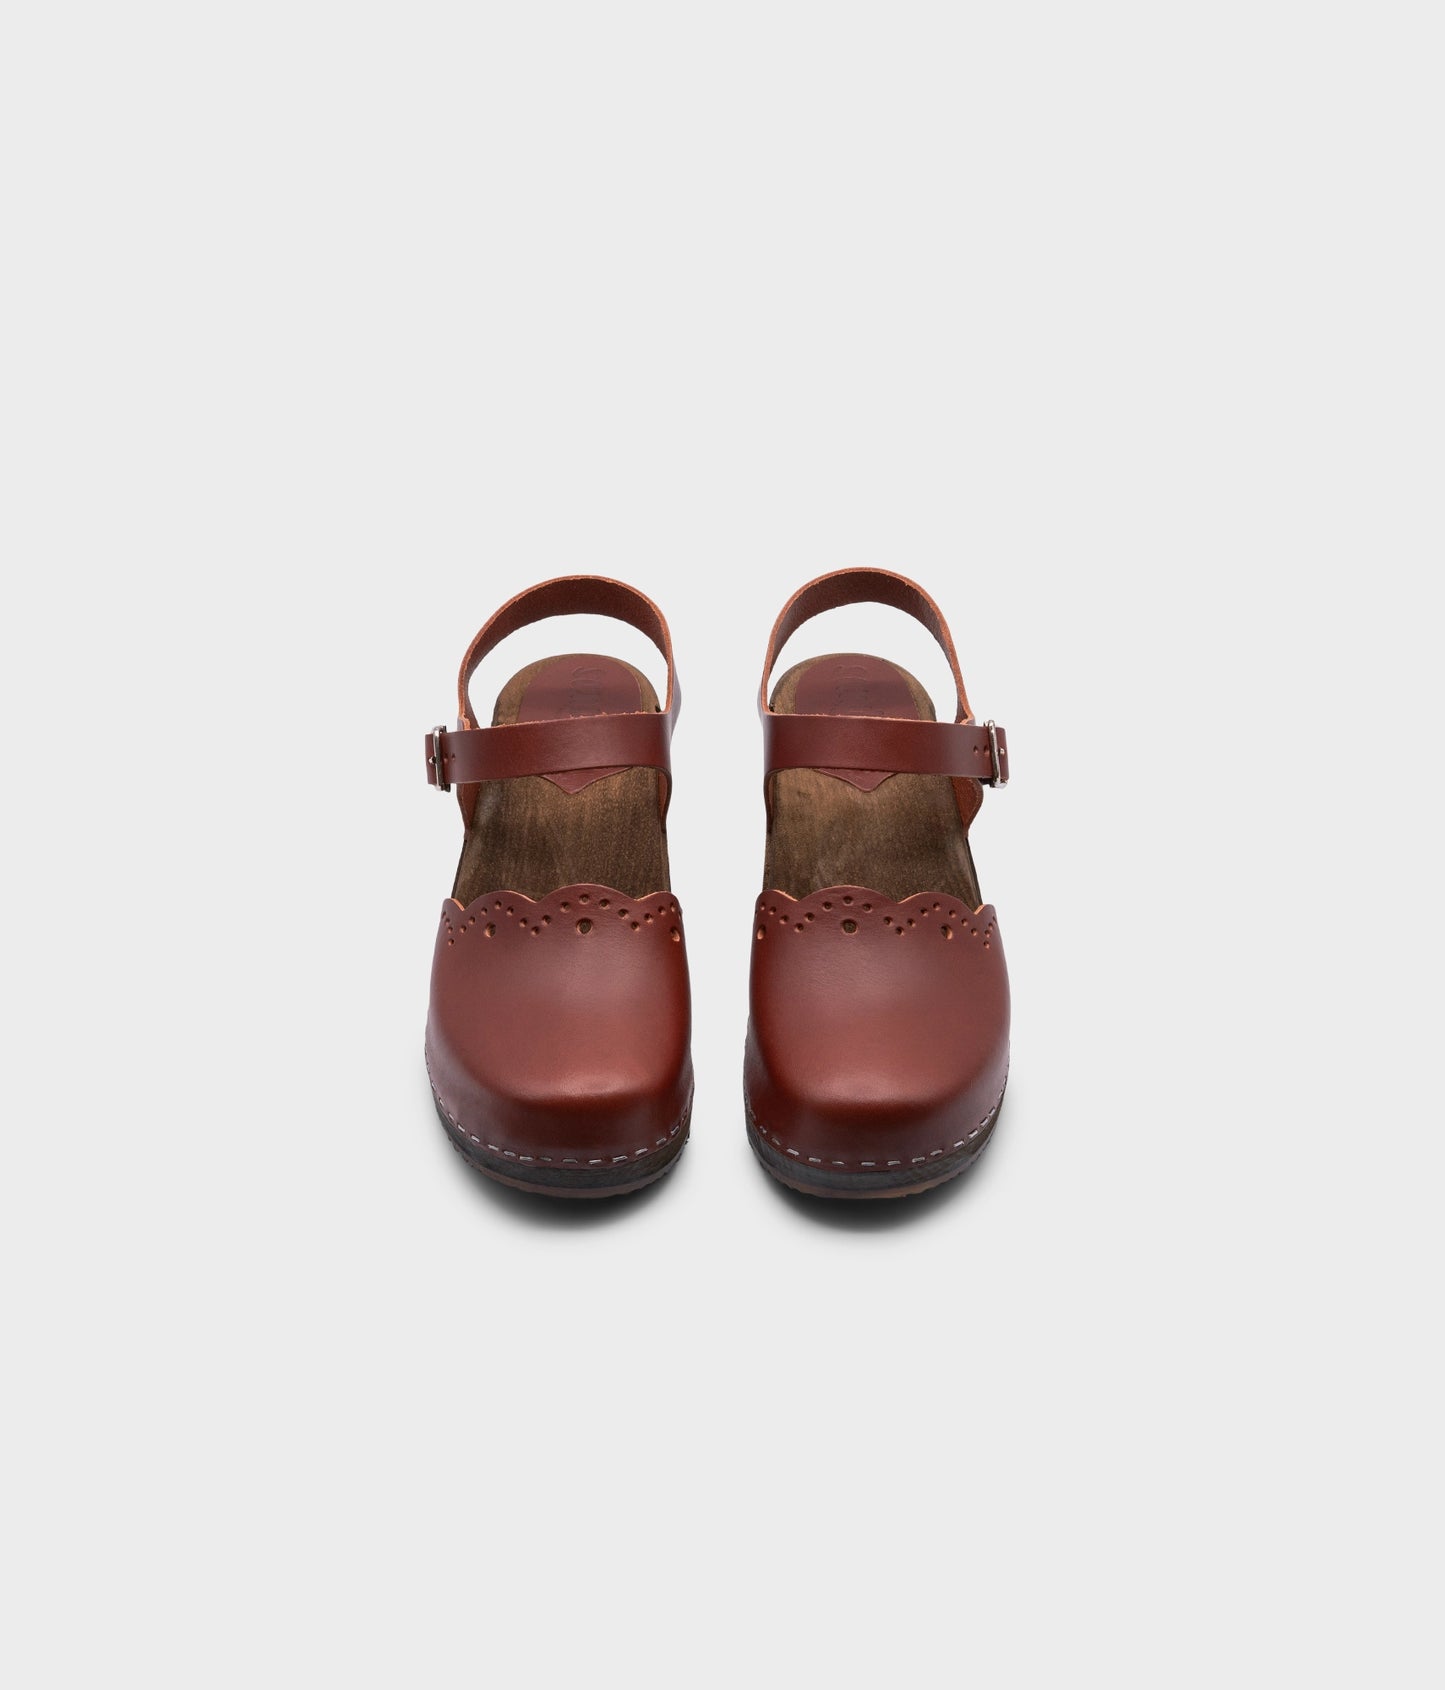 low heeled closed-toe clog sandals in cognac red vegetable tanned leather with a wavy leather cutout stapled on a dark wooden base